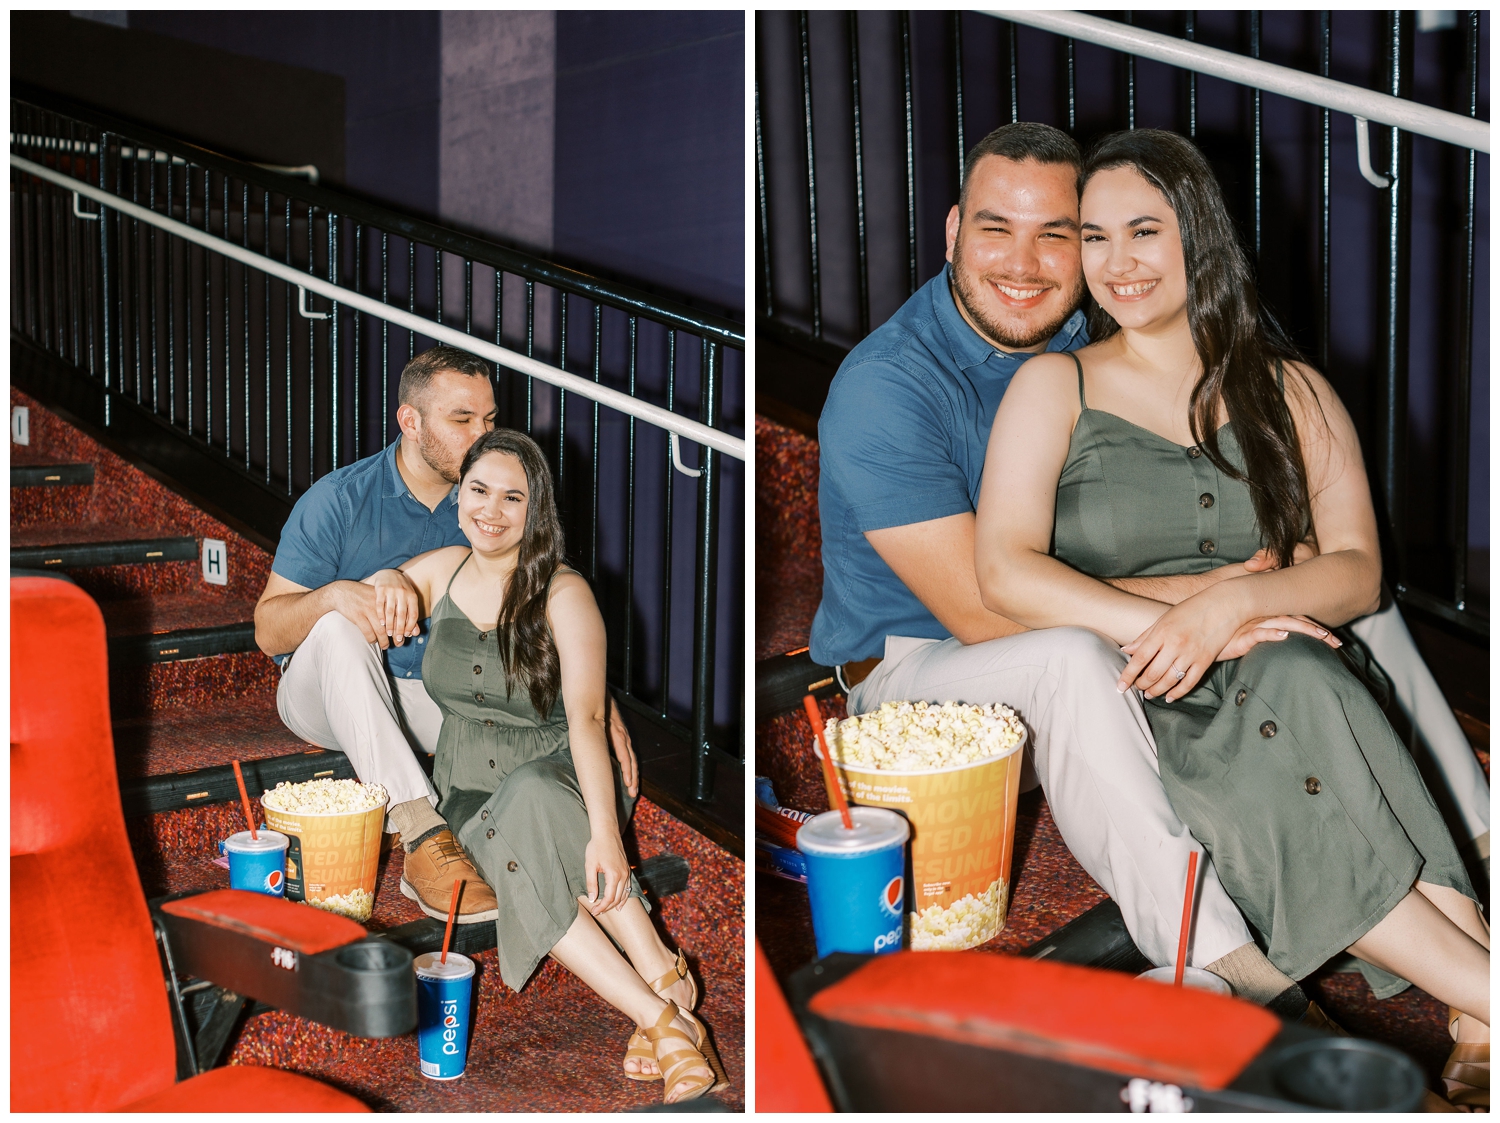 couple hugging inside movie theater on red seats